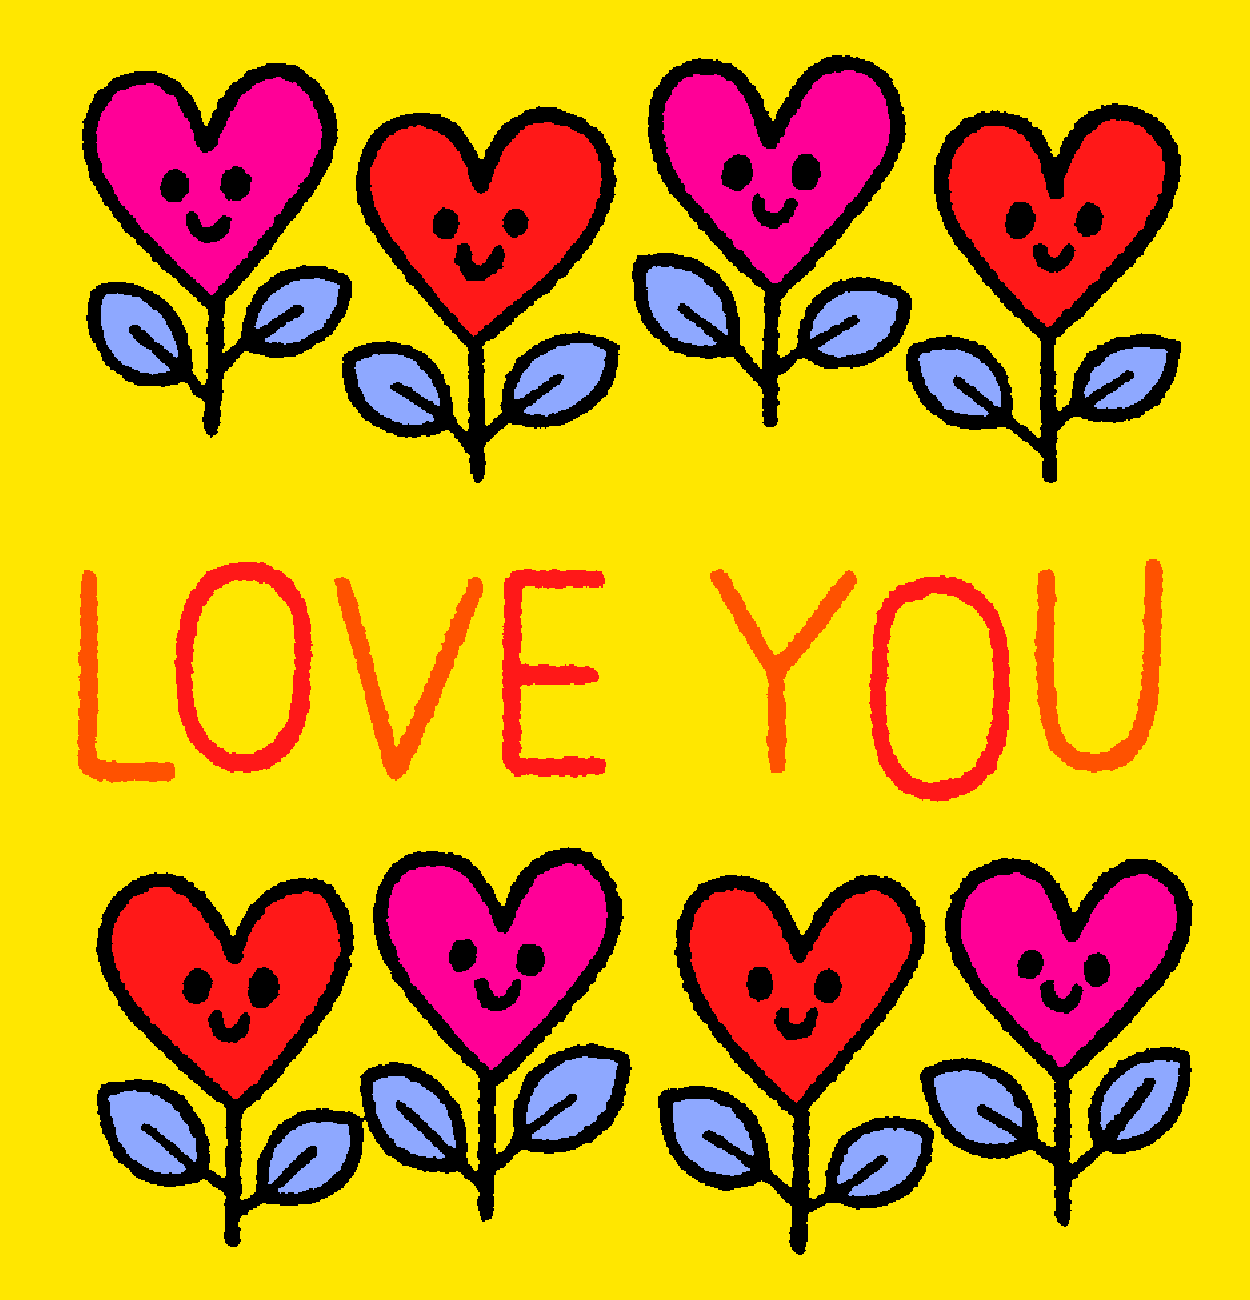 Animated graphic gif. Two rows of alternating pink and red heart-shaped flowers with smiley faces pulse in and out against a bright yellow background, framing the text at the center, "Love you."